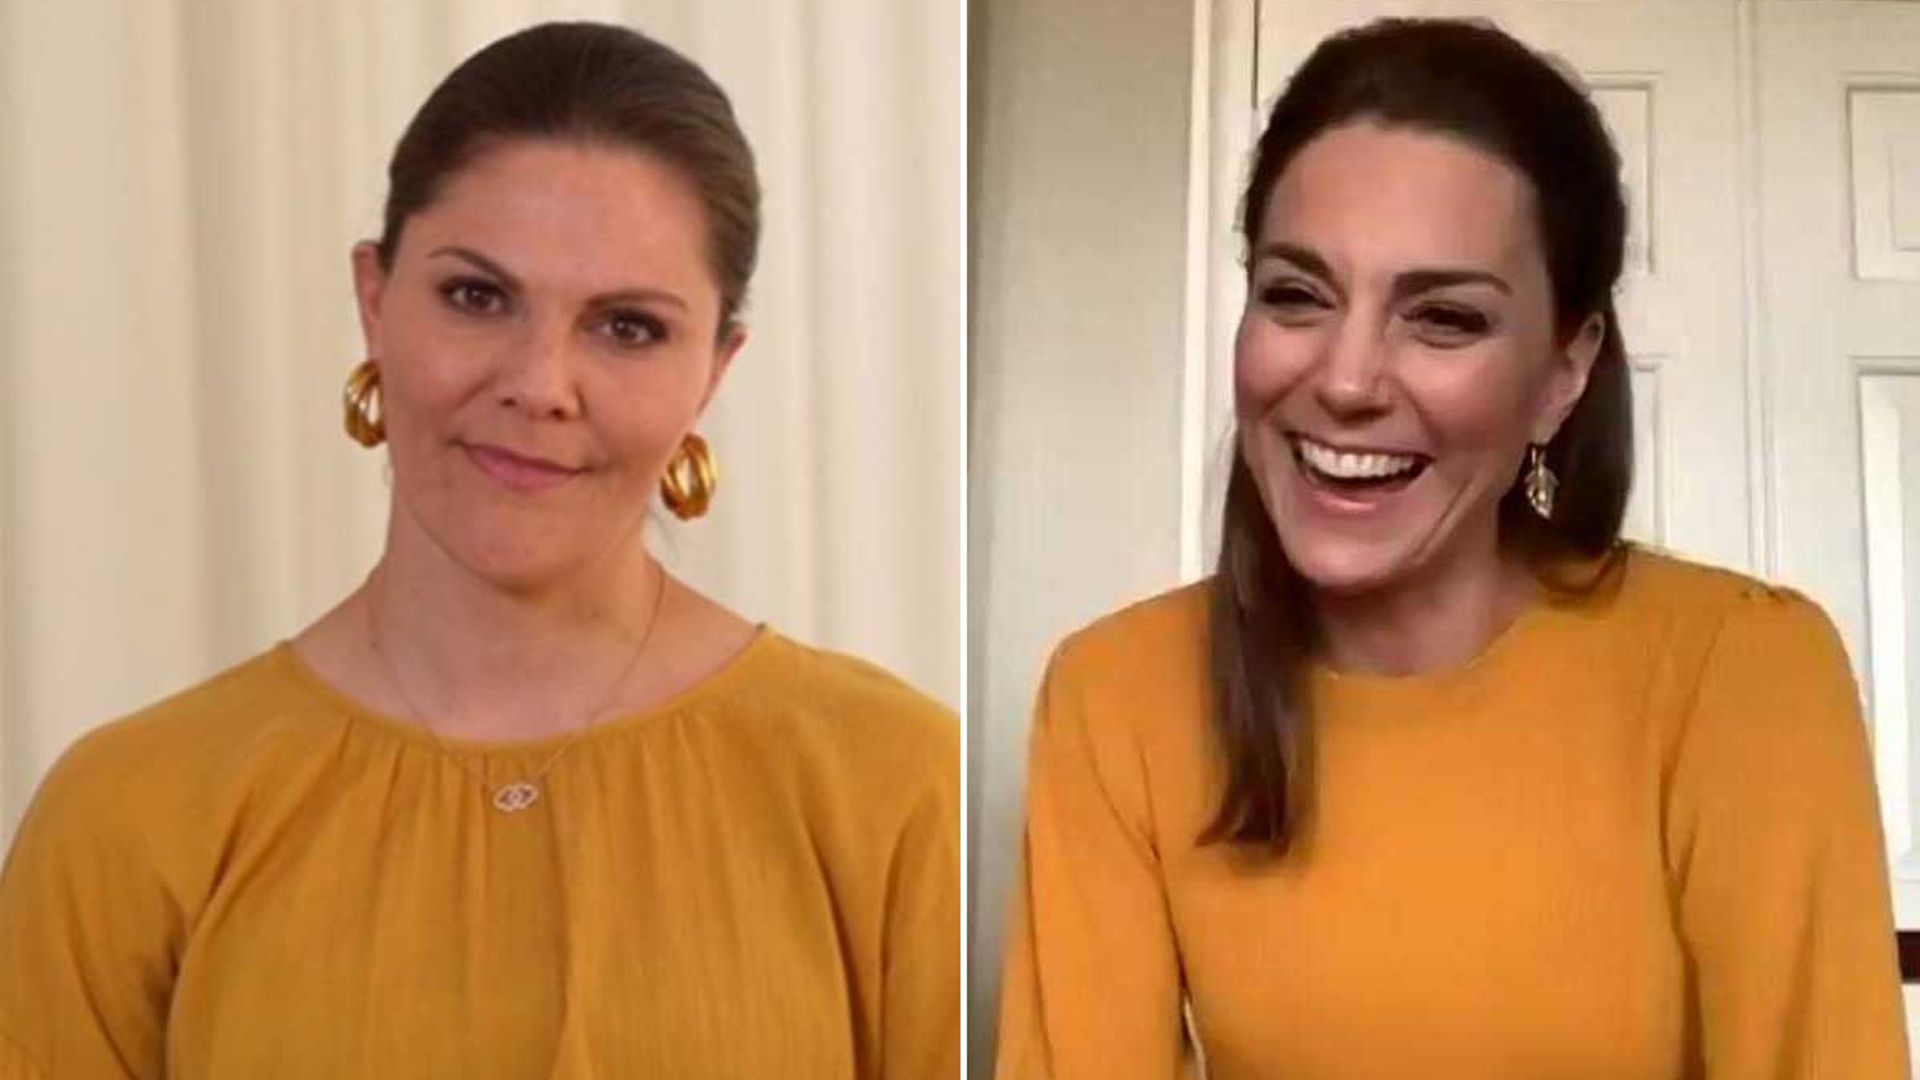 Crown Princess Victoria twins with Kate Middleton in daring mustard dress